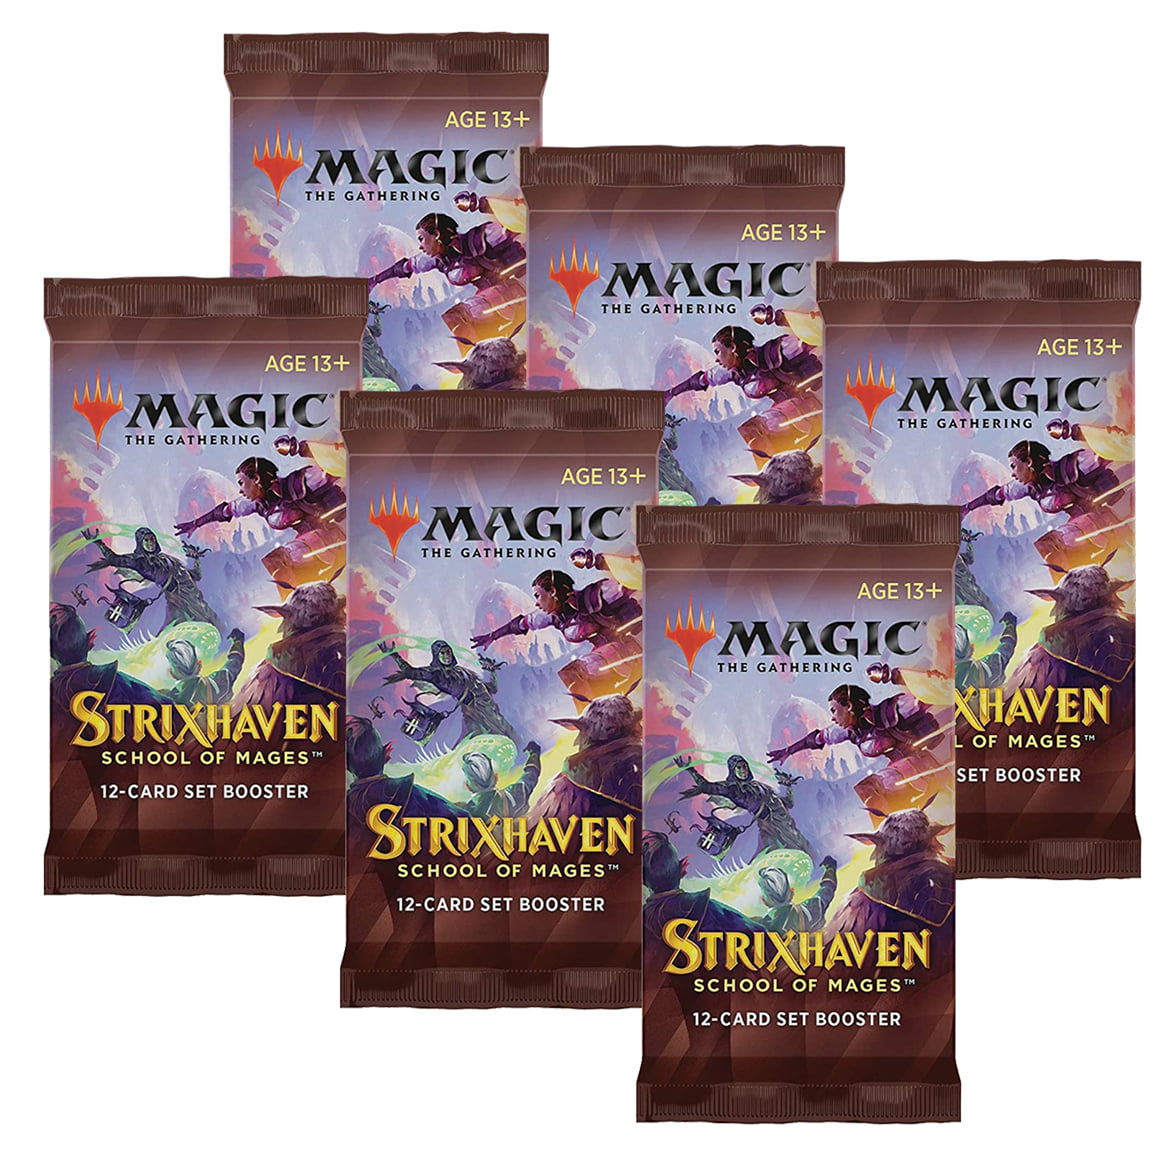 Magic The Gathering Strixhaven Booster Box 30 Packs for sale online 